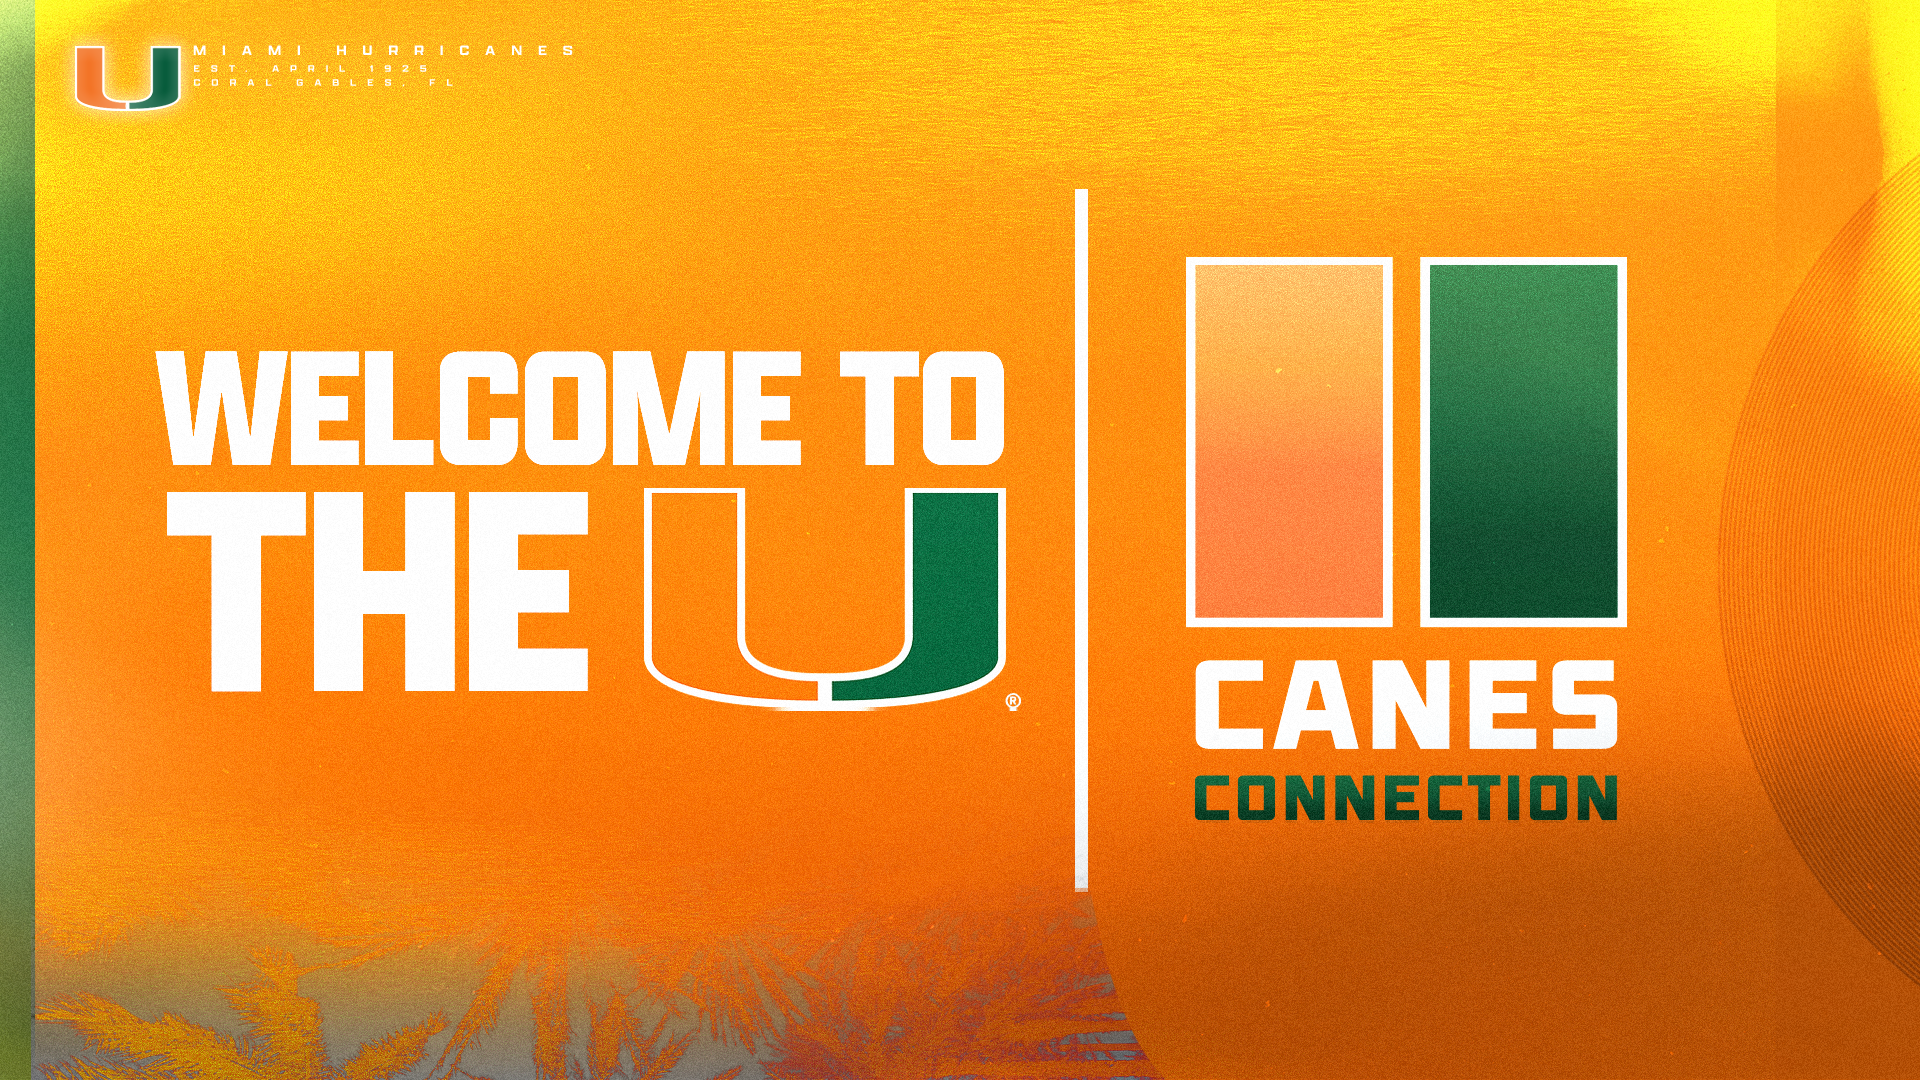 Canes Connection Named Official NIL Collective of University of Miami Athletics